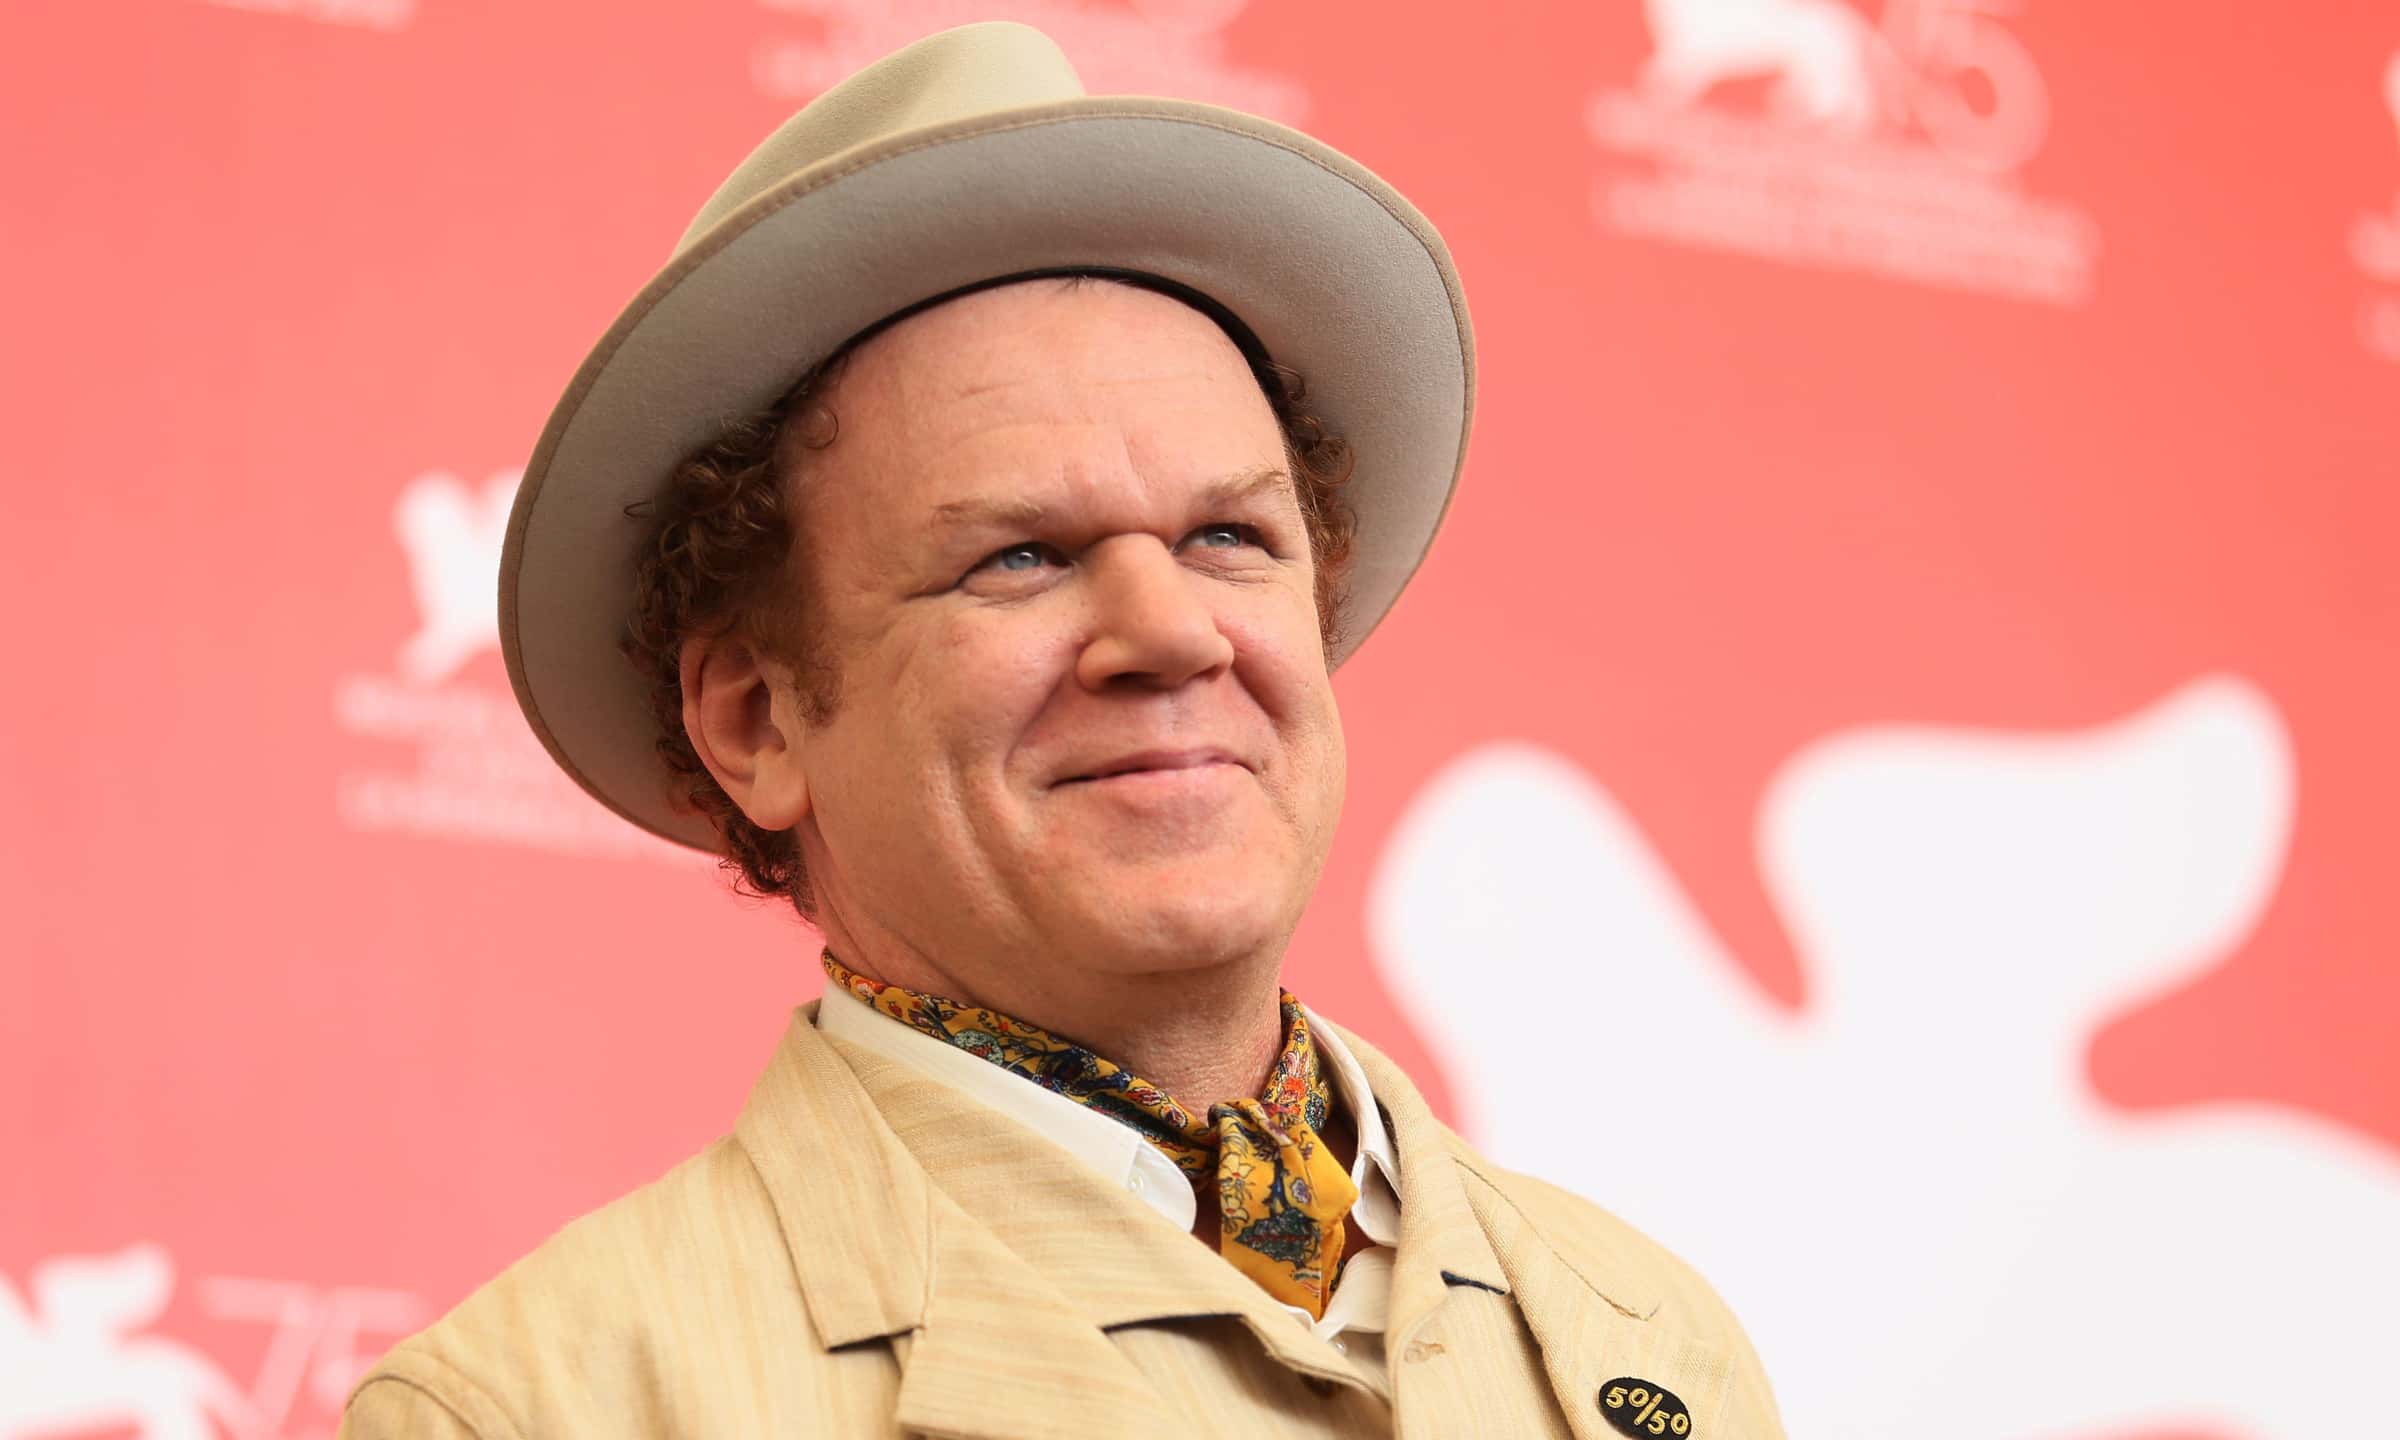 33-facts-about-john-c-reilly